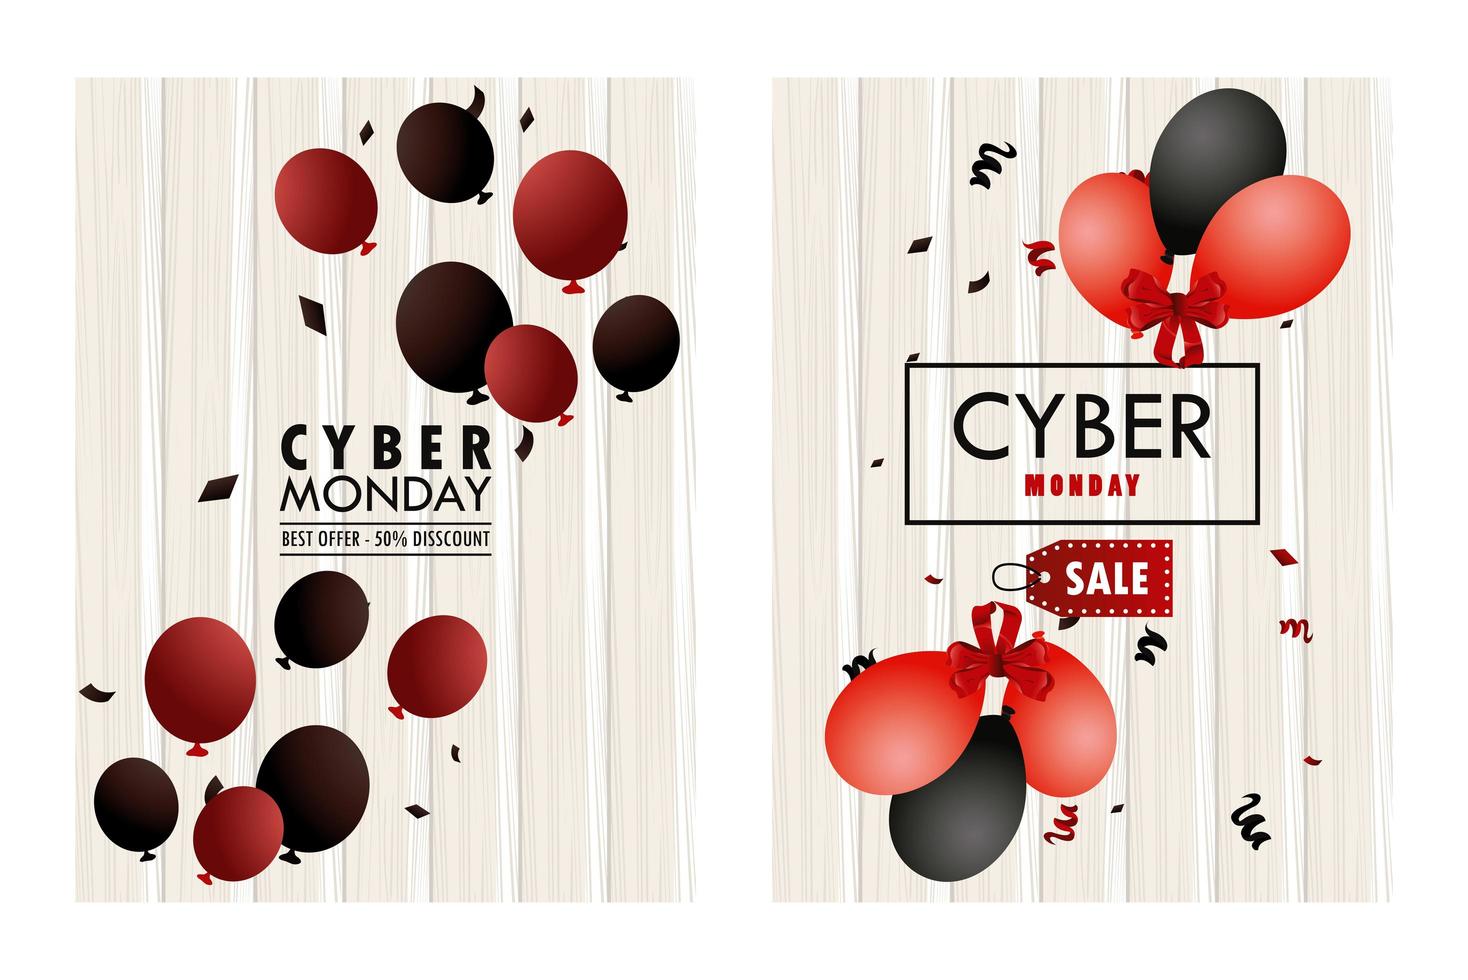 cyber monday holiday poster with red and black colors balloons helium wooden frames vector